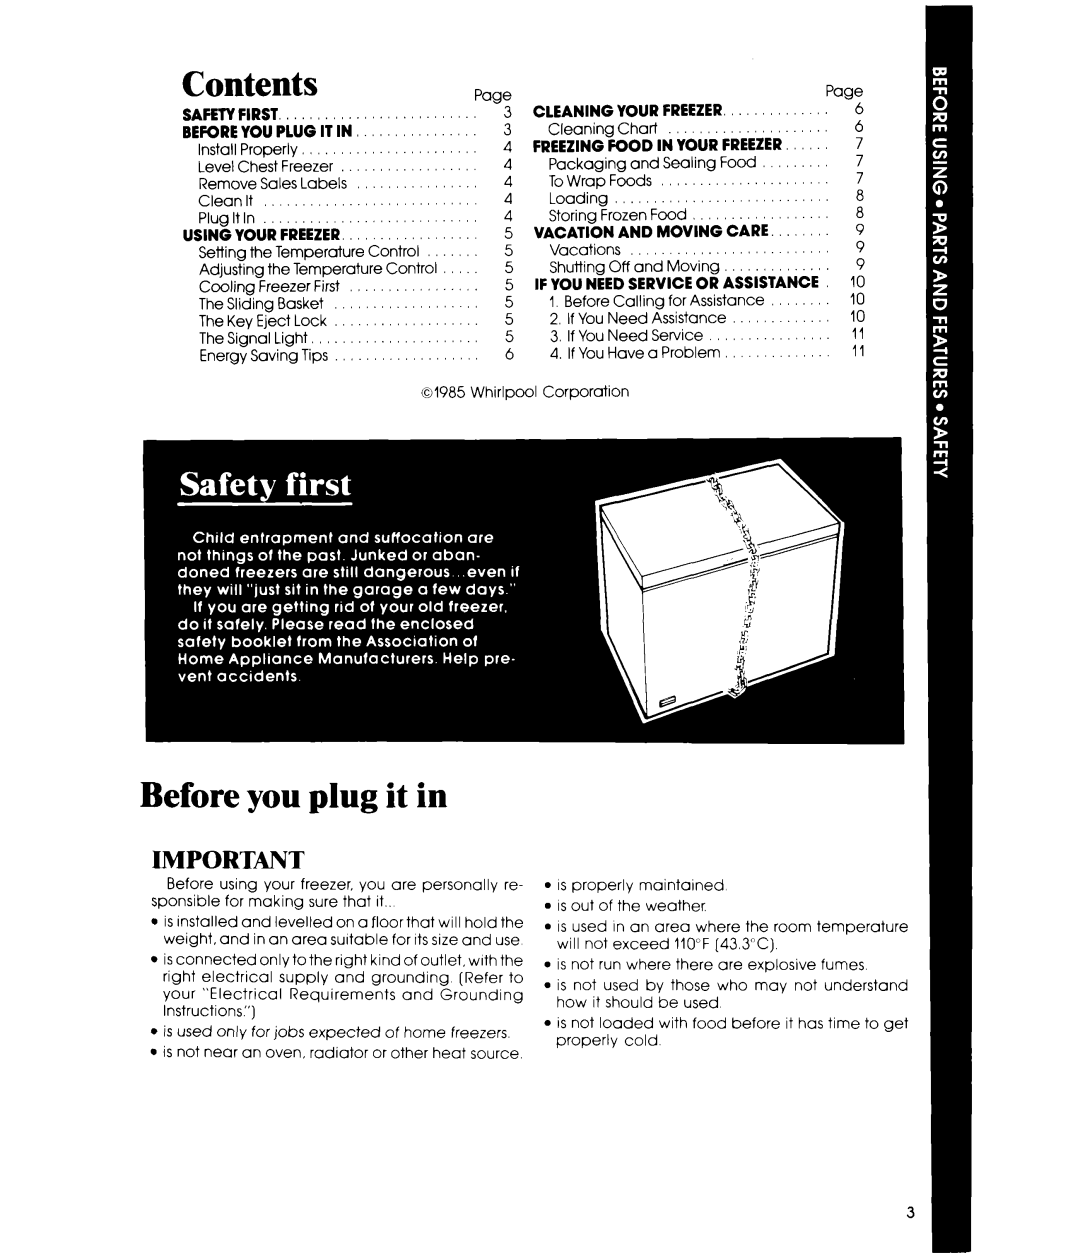 Whirlpool EHOGOF, EHOSOF manual Contents, Before you plug it in 